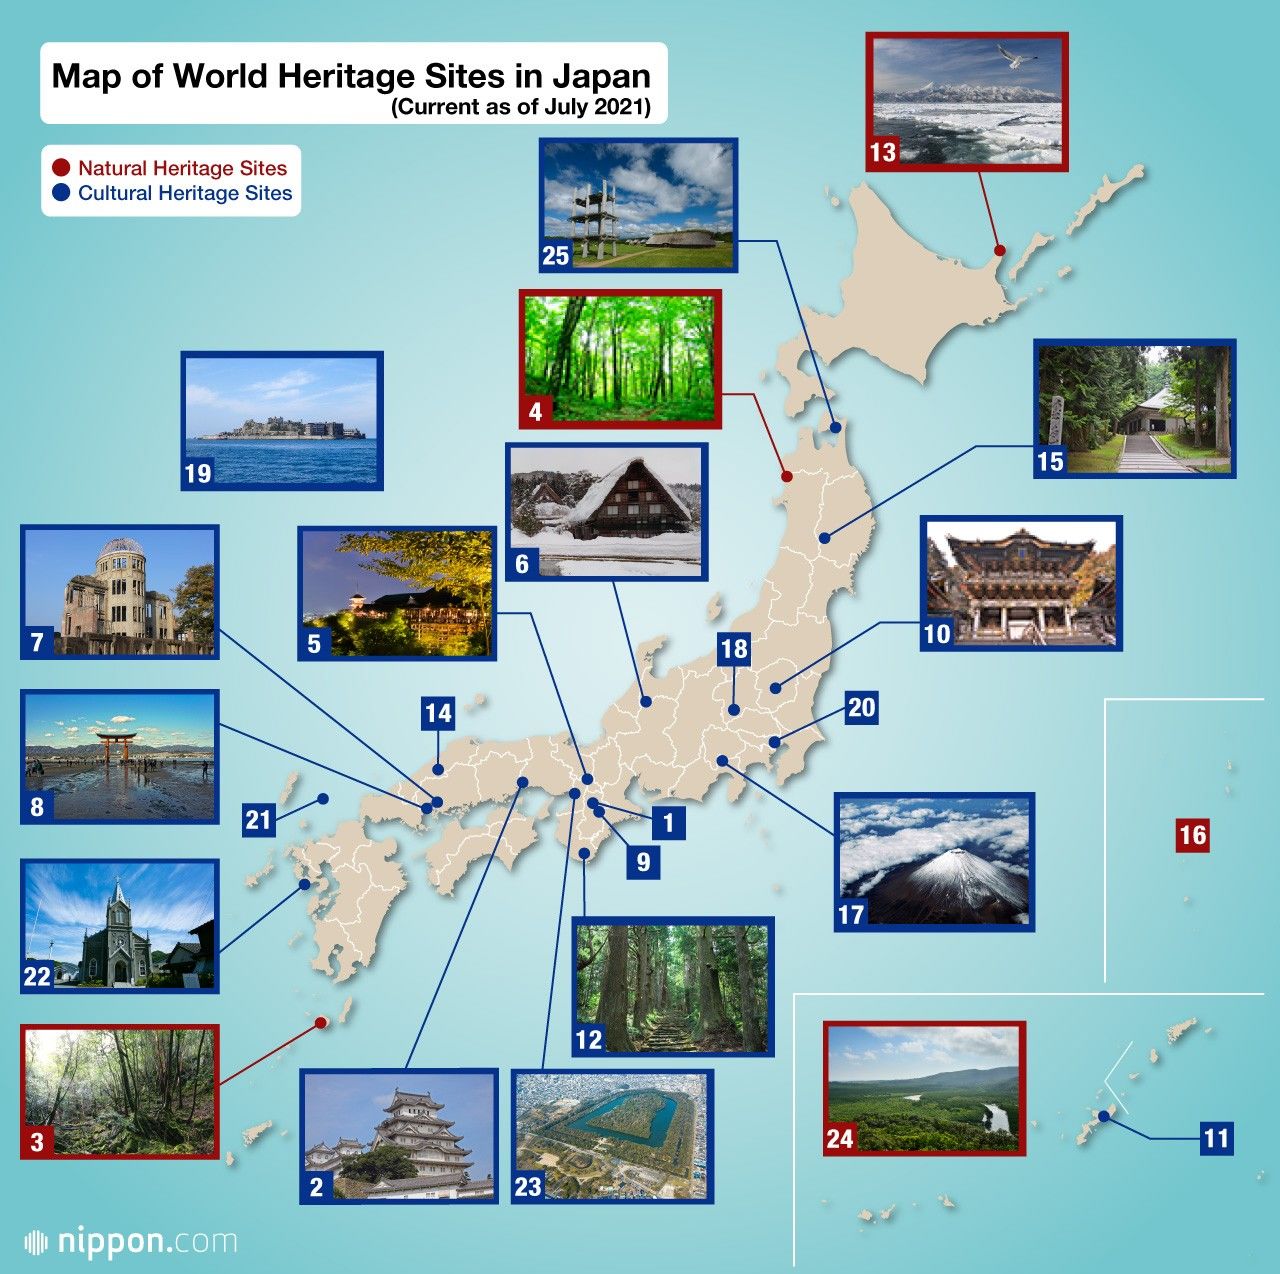 Japan’s 25 UNESCO World Heritage Sites New Additions Highlight